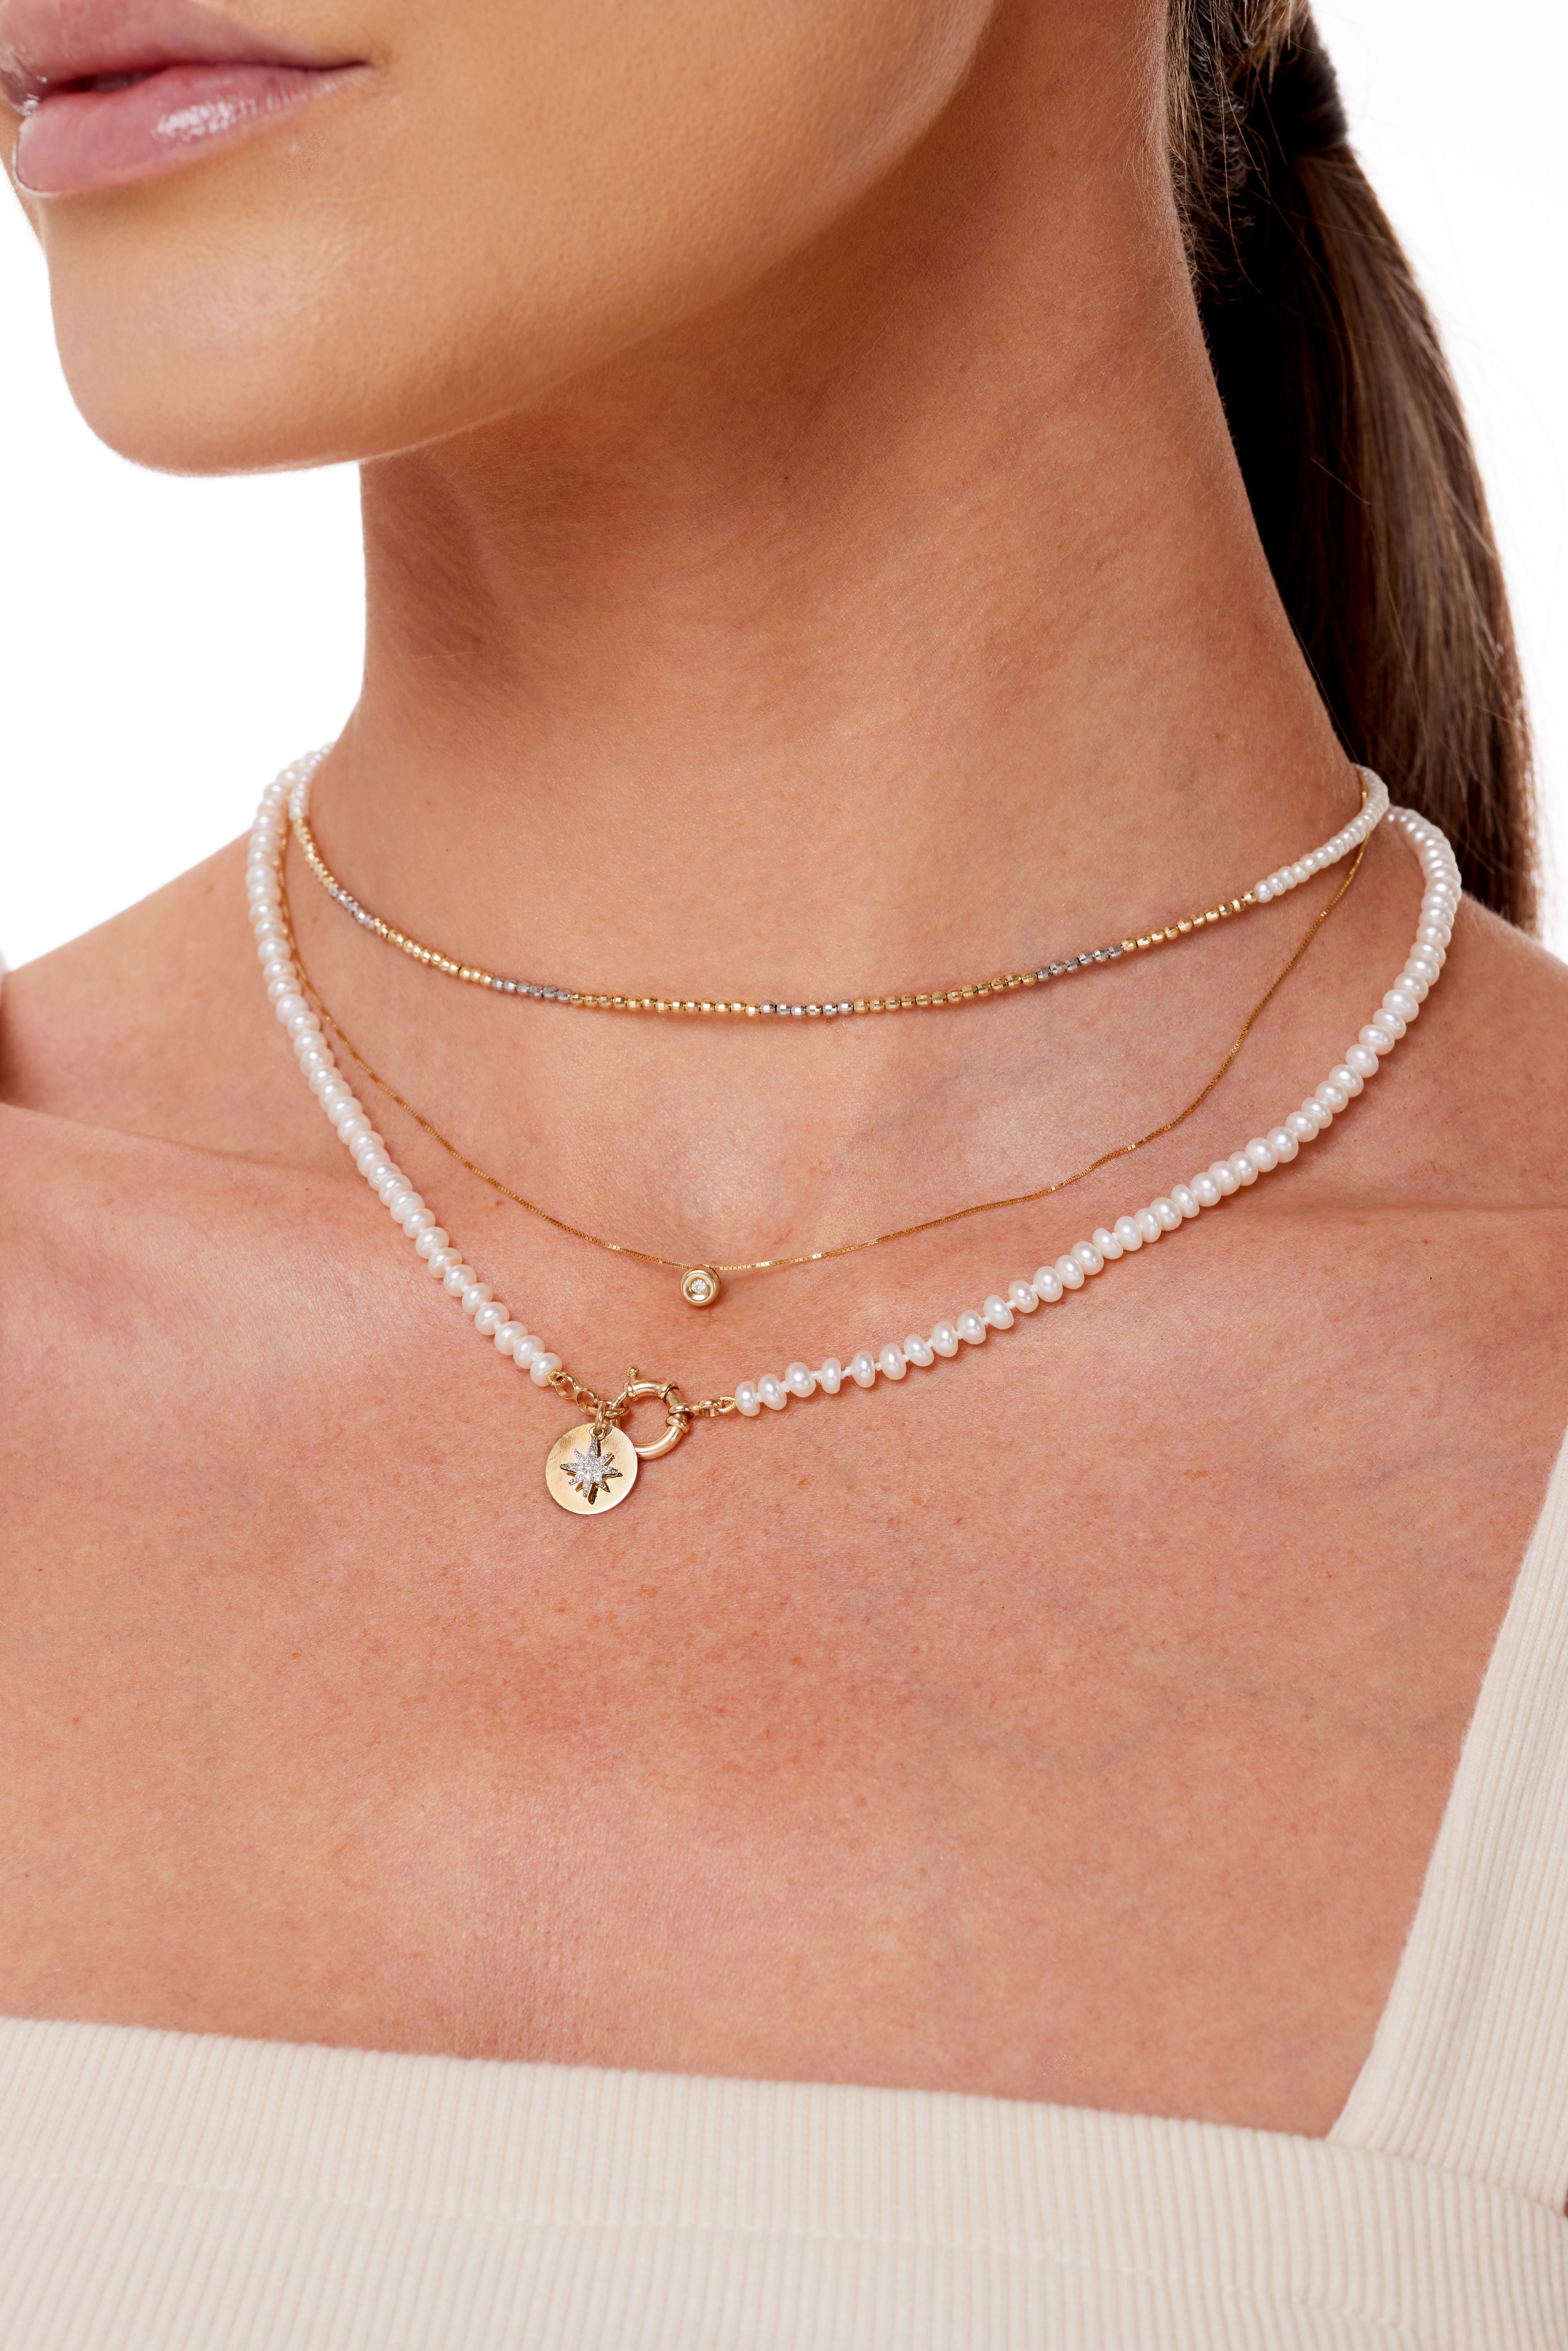 A delicate yet standout piece, this 14k faceted yellow and white Gold beads and pearl choker will sparkle across the room!  It can be worn alone or layered with another necklace to create a bolder look. Change your look and wear with the gold beads